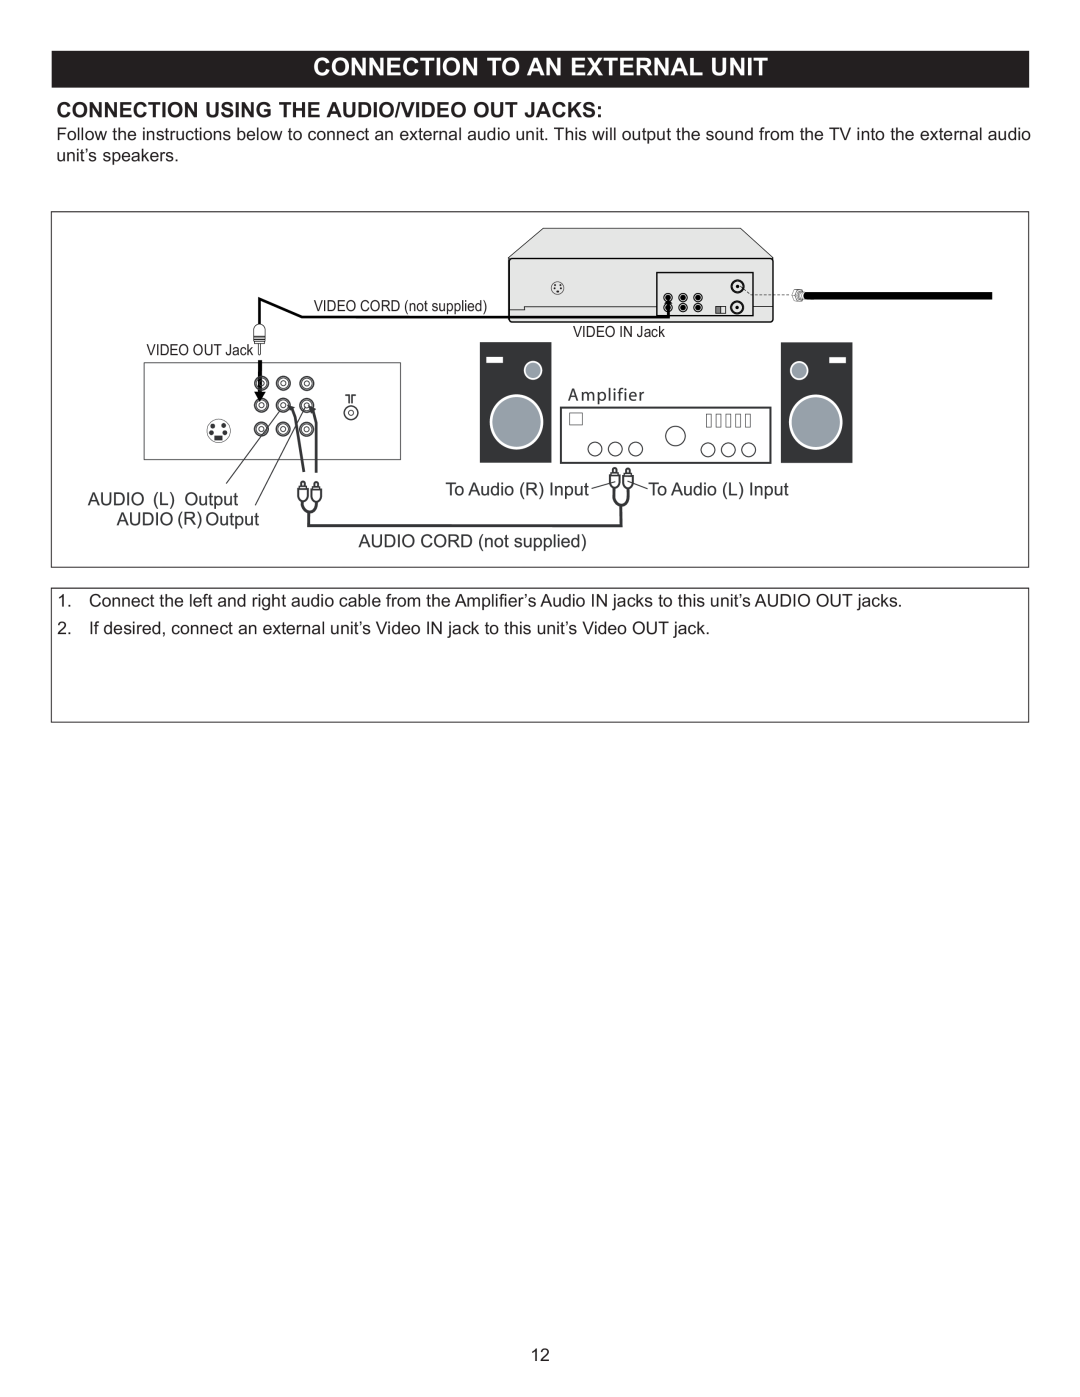 Memorex MT2028D-BLK manual Connection Using The Audio/Video Out Jacks, VIDEO CORD not supplied, VIDEO OUT Jack 